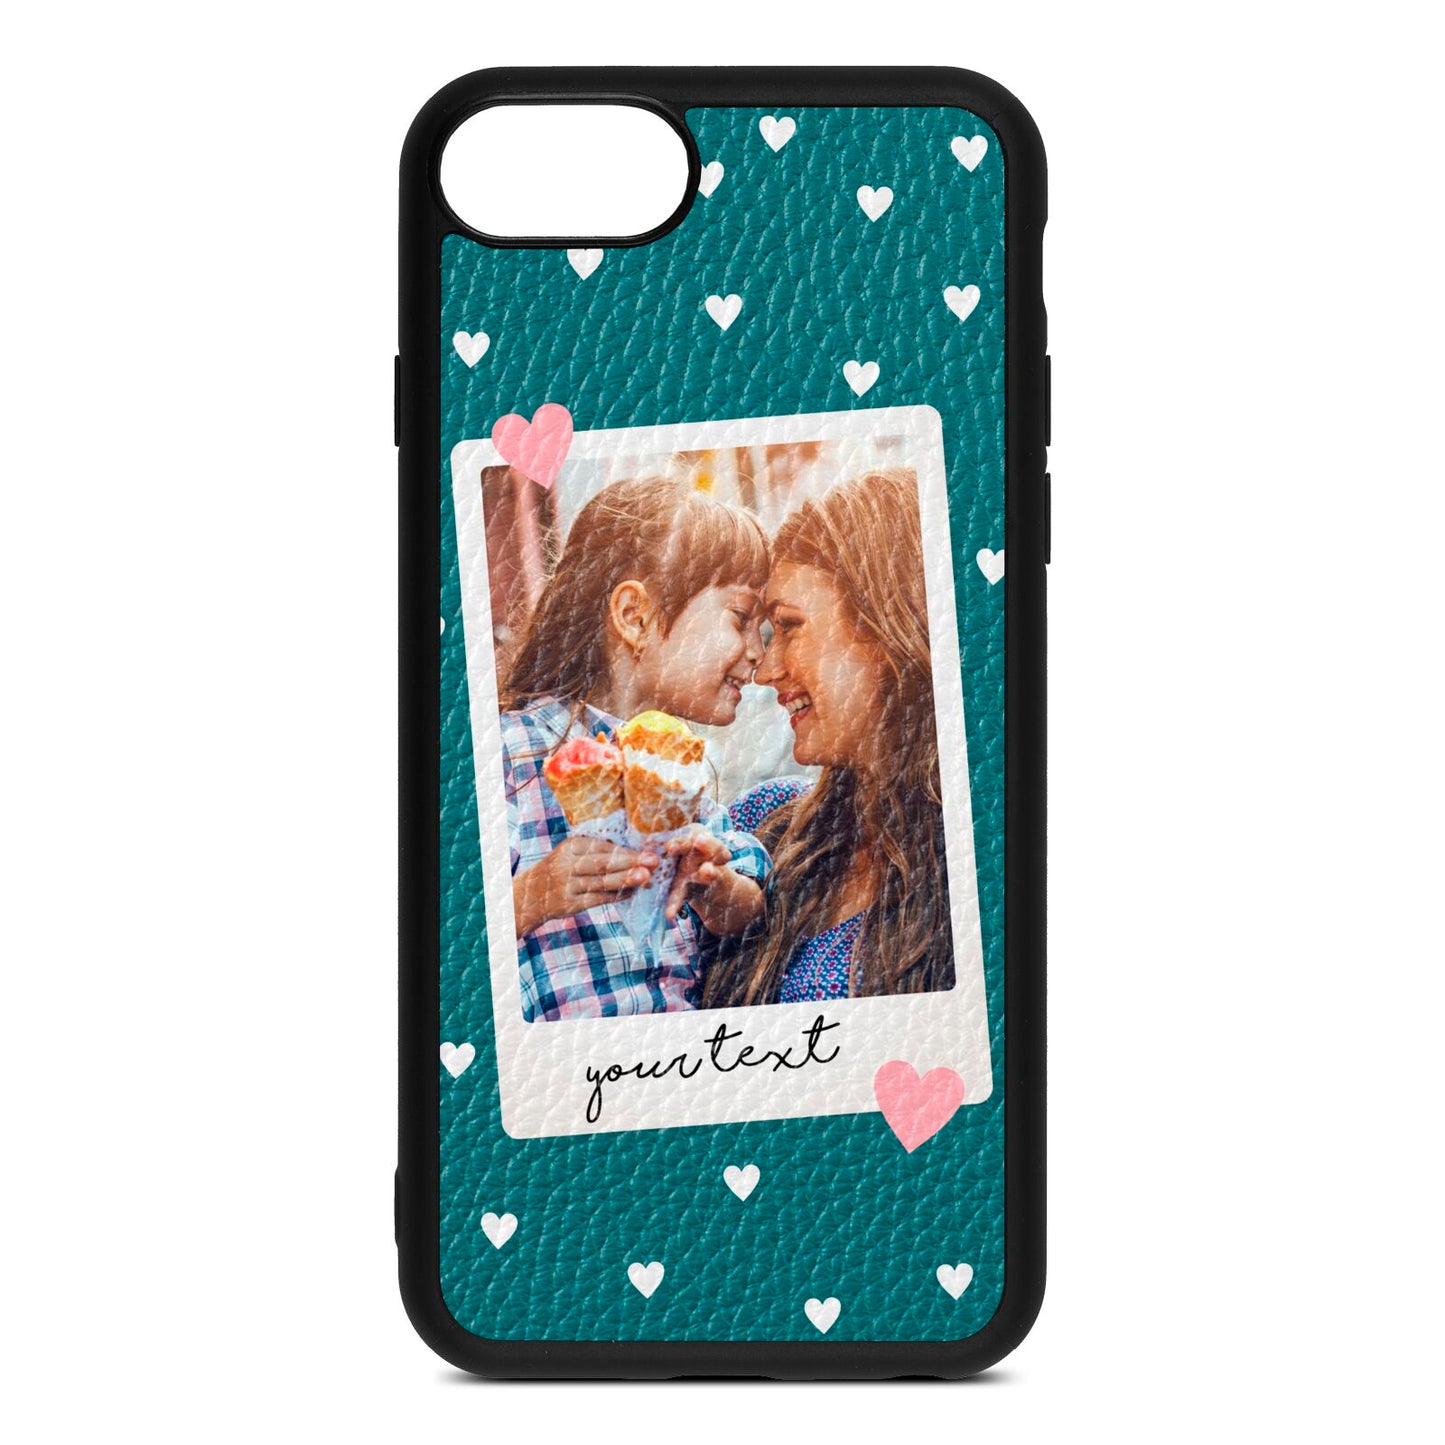 Personalised Photo Love Hearts Green Pebble Leather iPhone 8 Case